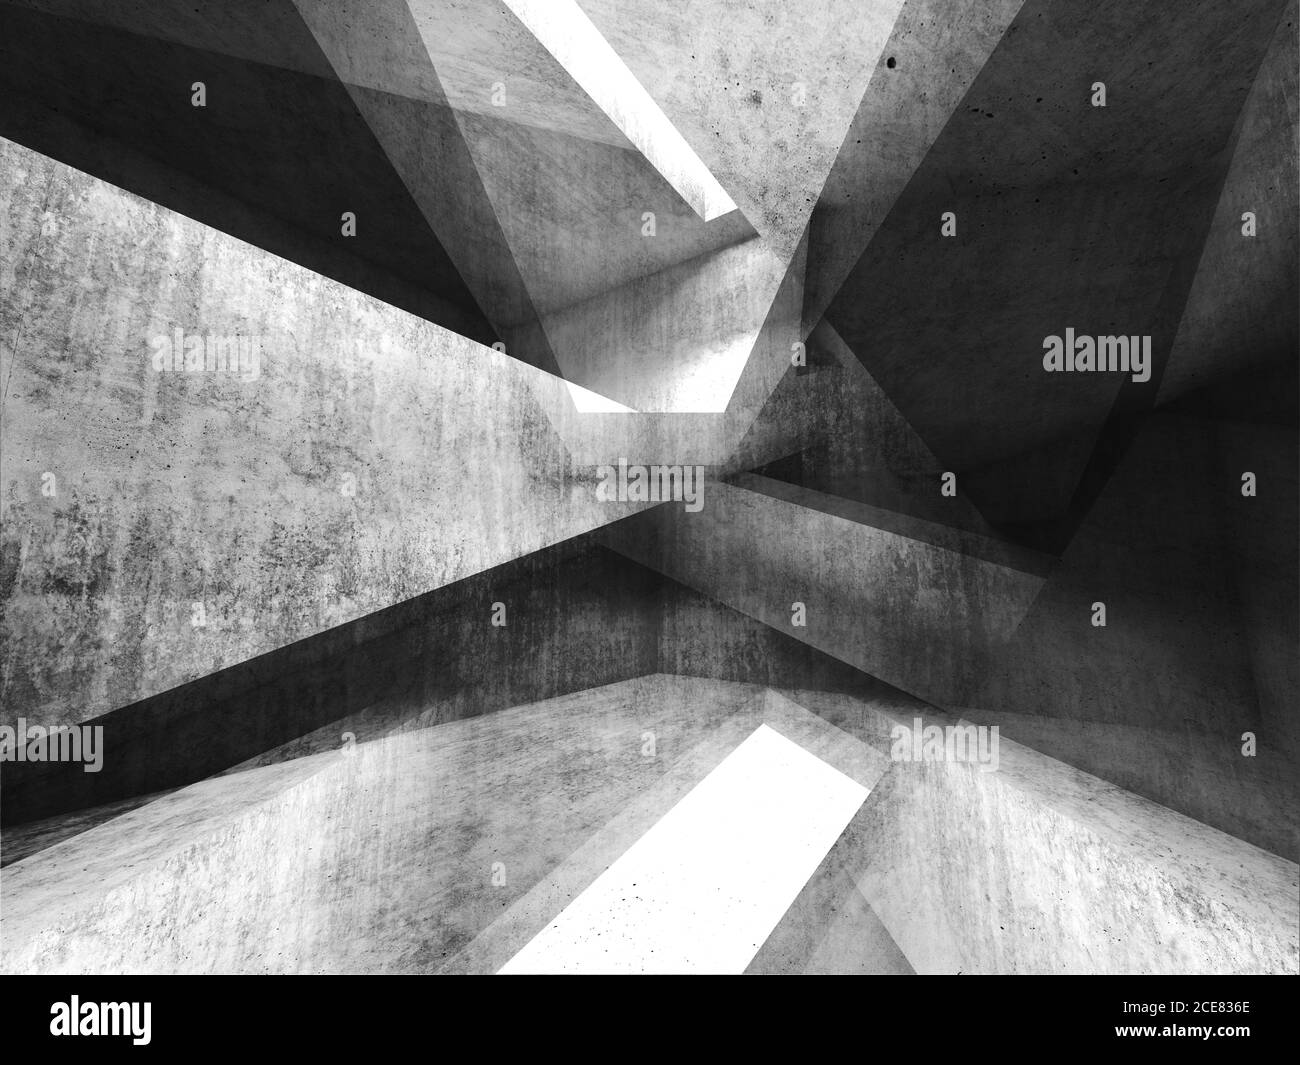 Abstract dark mixed media background, intersected concrete walls, digital  illustration with double exposure effect, 3d render Stock Photo